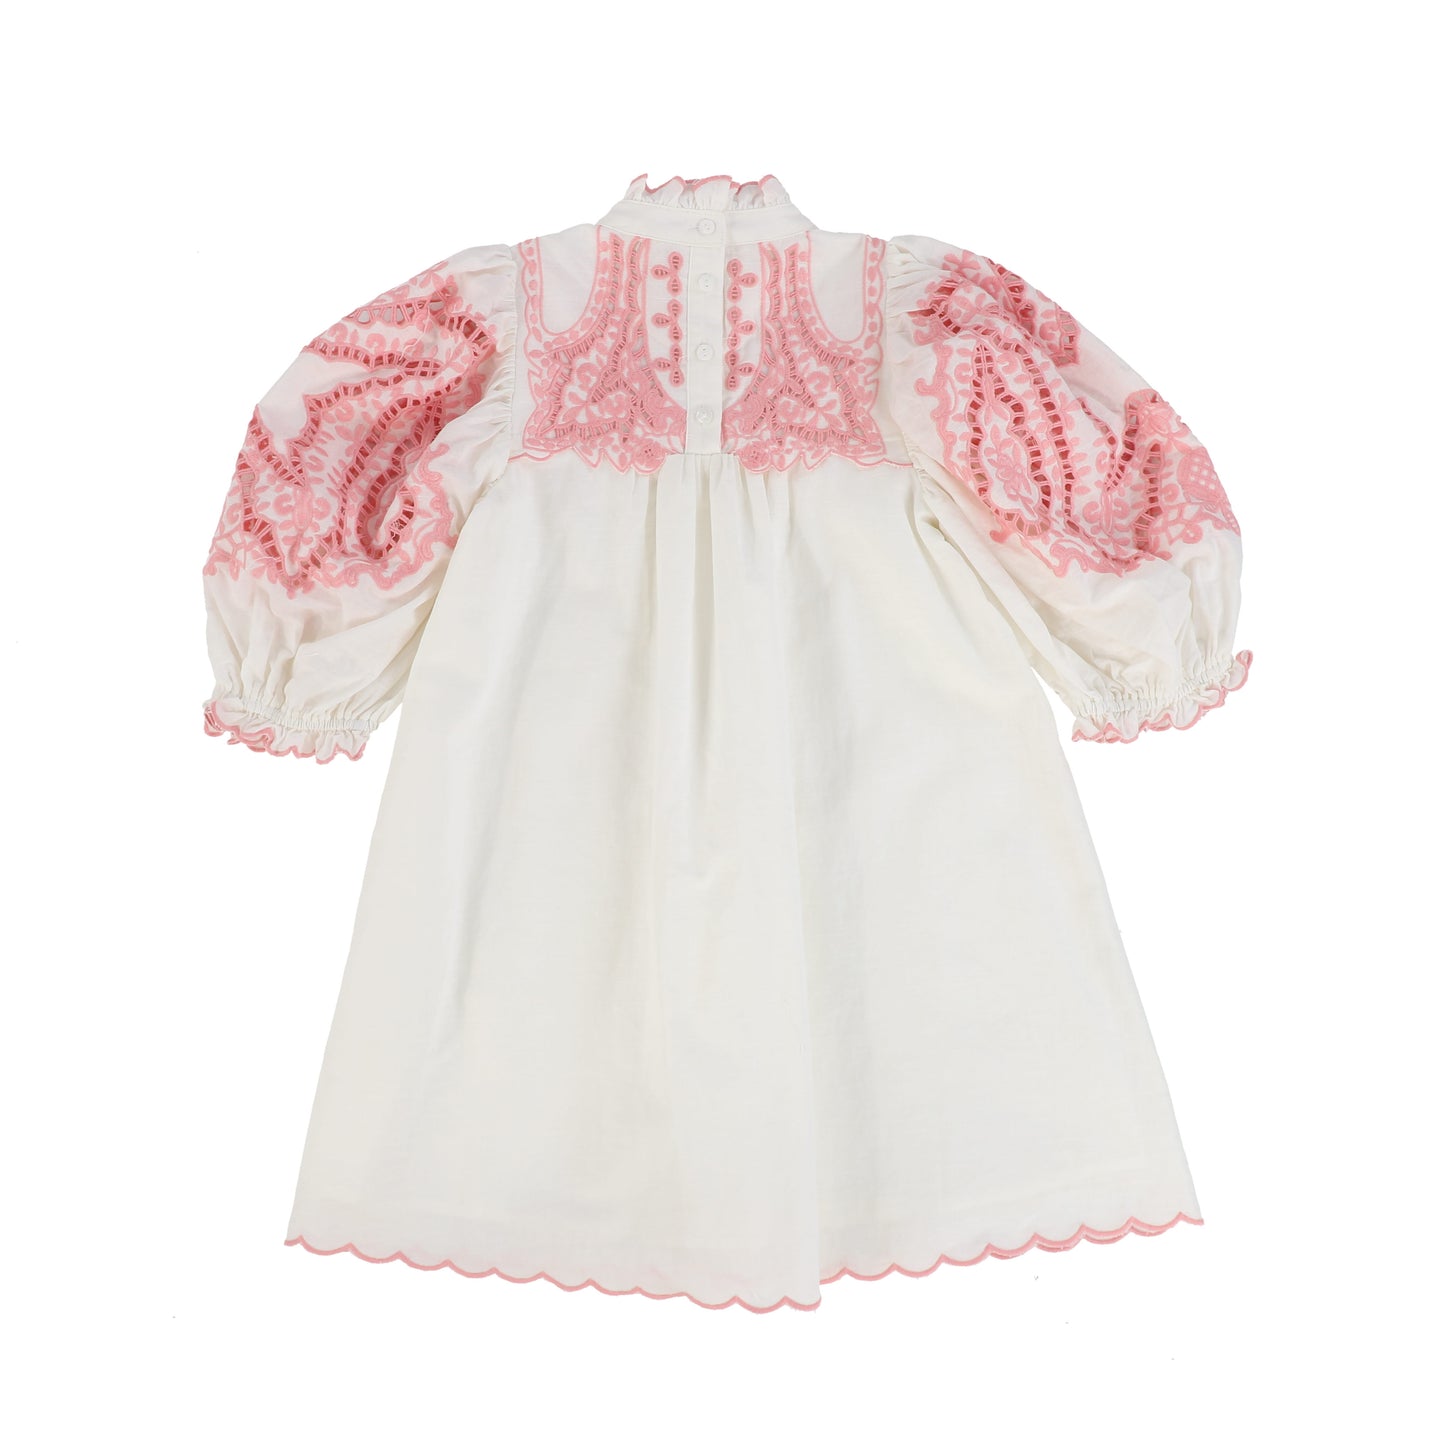 PETITE AMALIE WHITE/PINK EMBROIDERED LINEN SMOCKED DRESS [FINAL SALE]